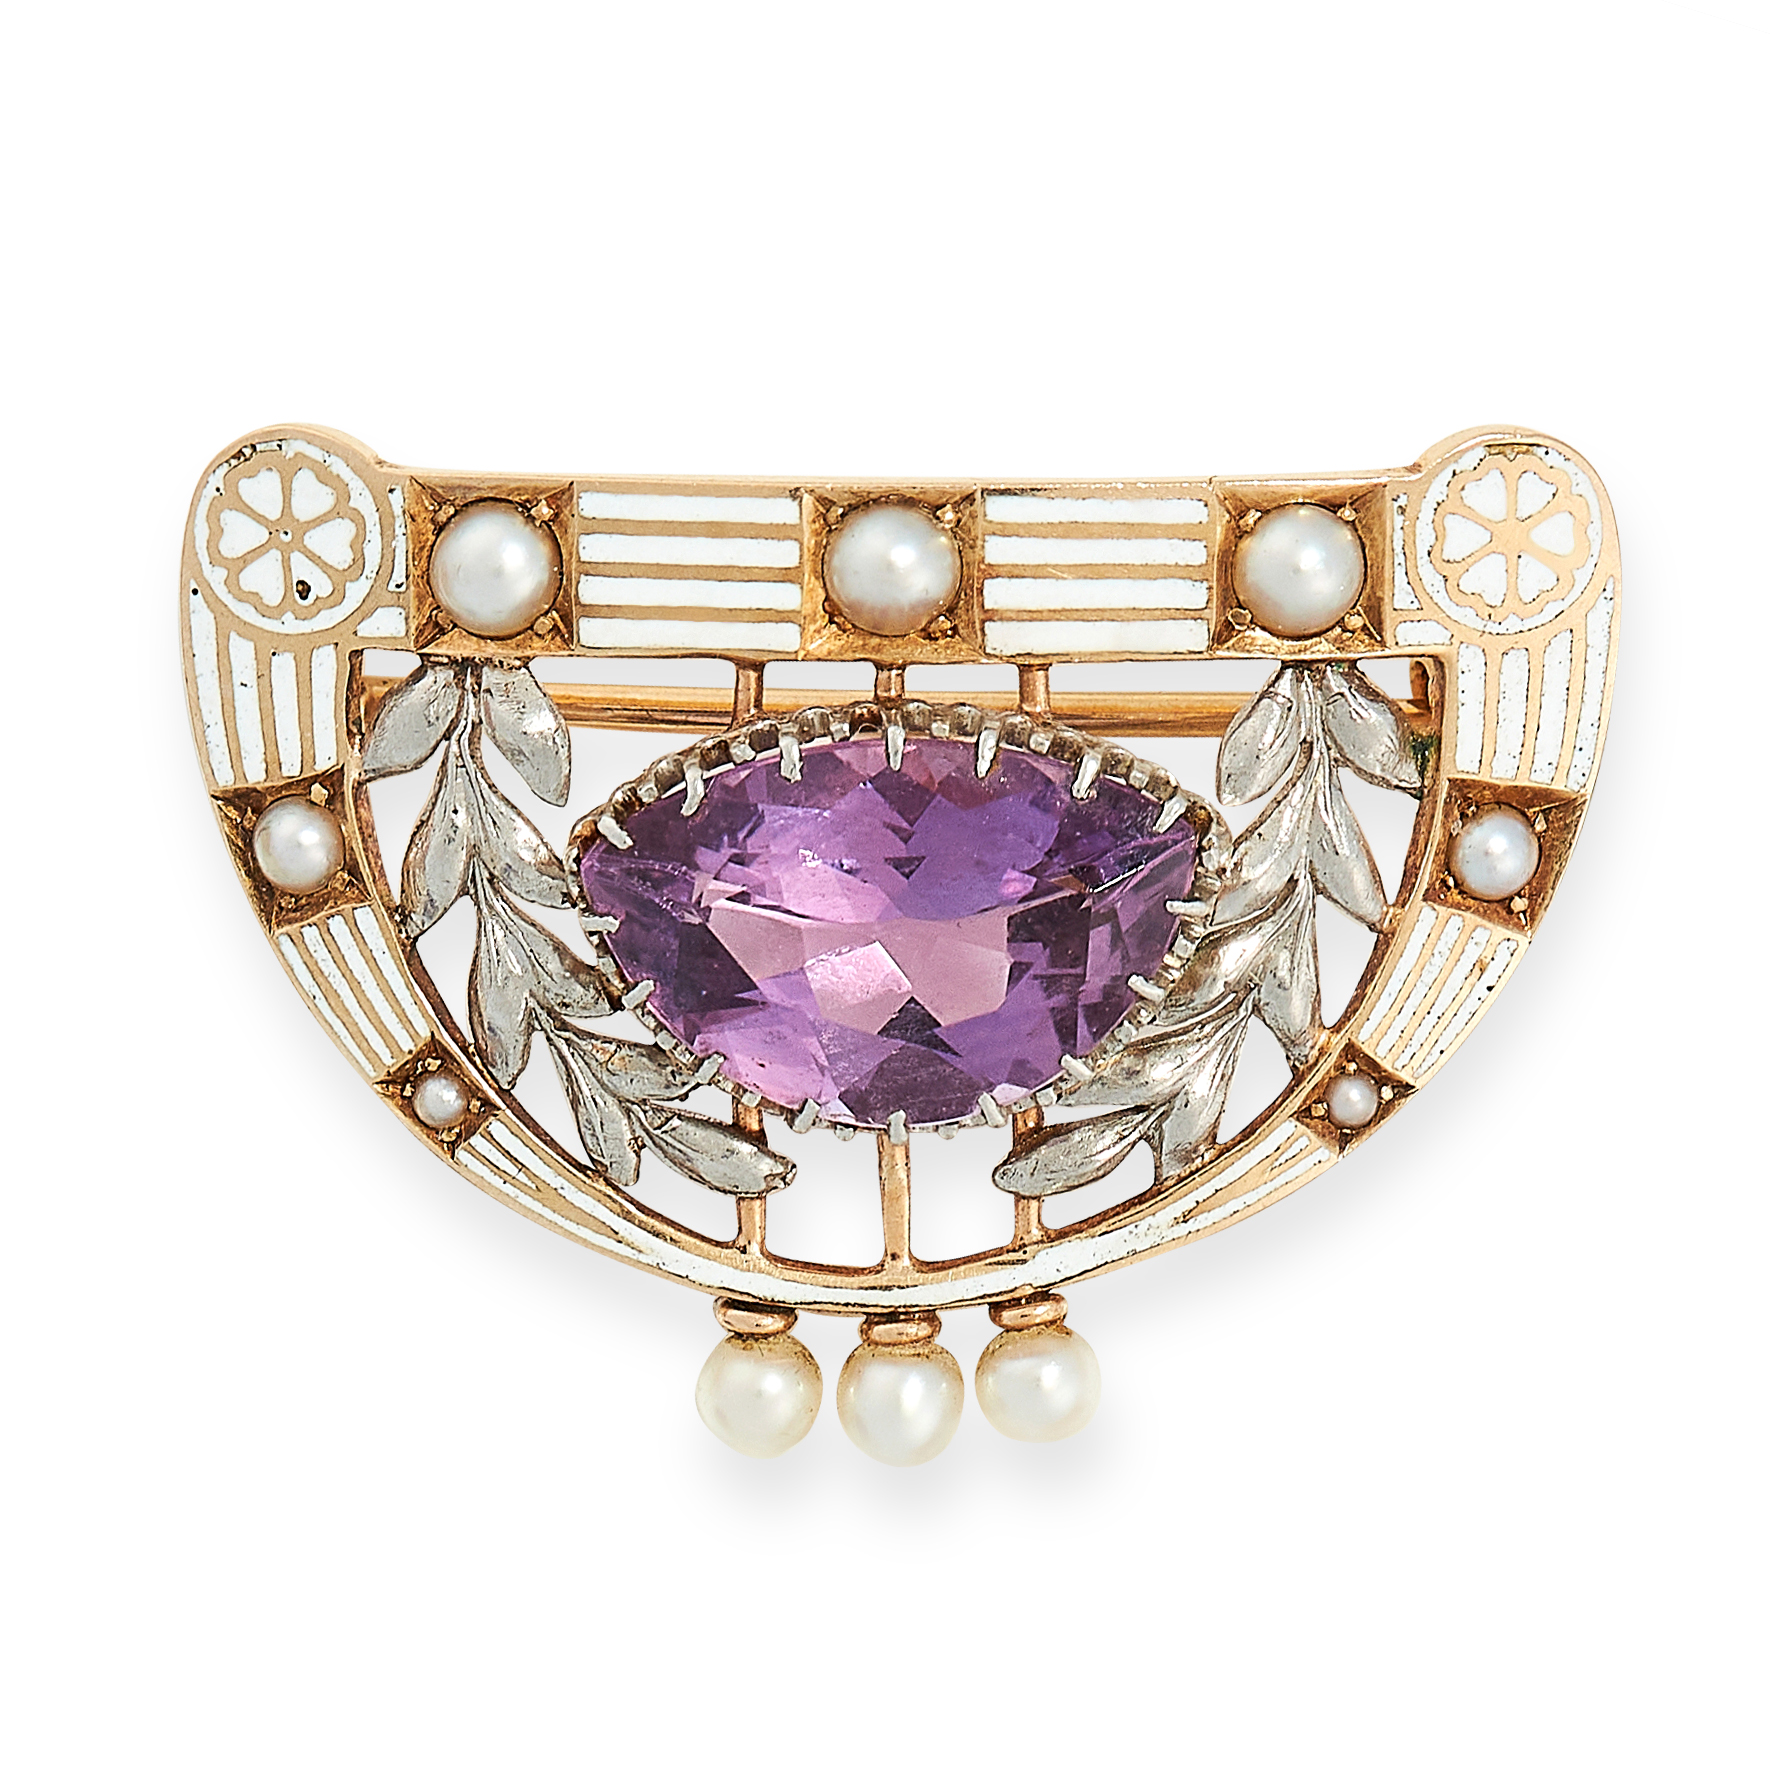 ANTIQUE AMETHYST, PEARL AND ENAMEL BROOCH, CIRCA 1900 mounted in yellow gold and silver, set with